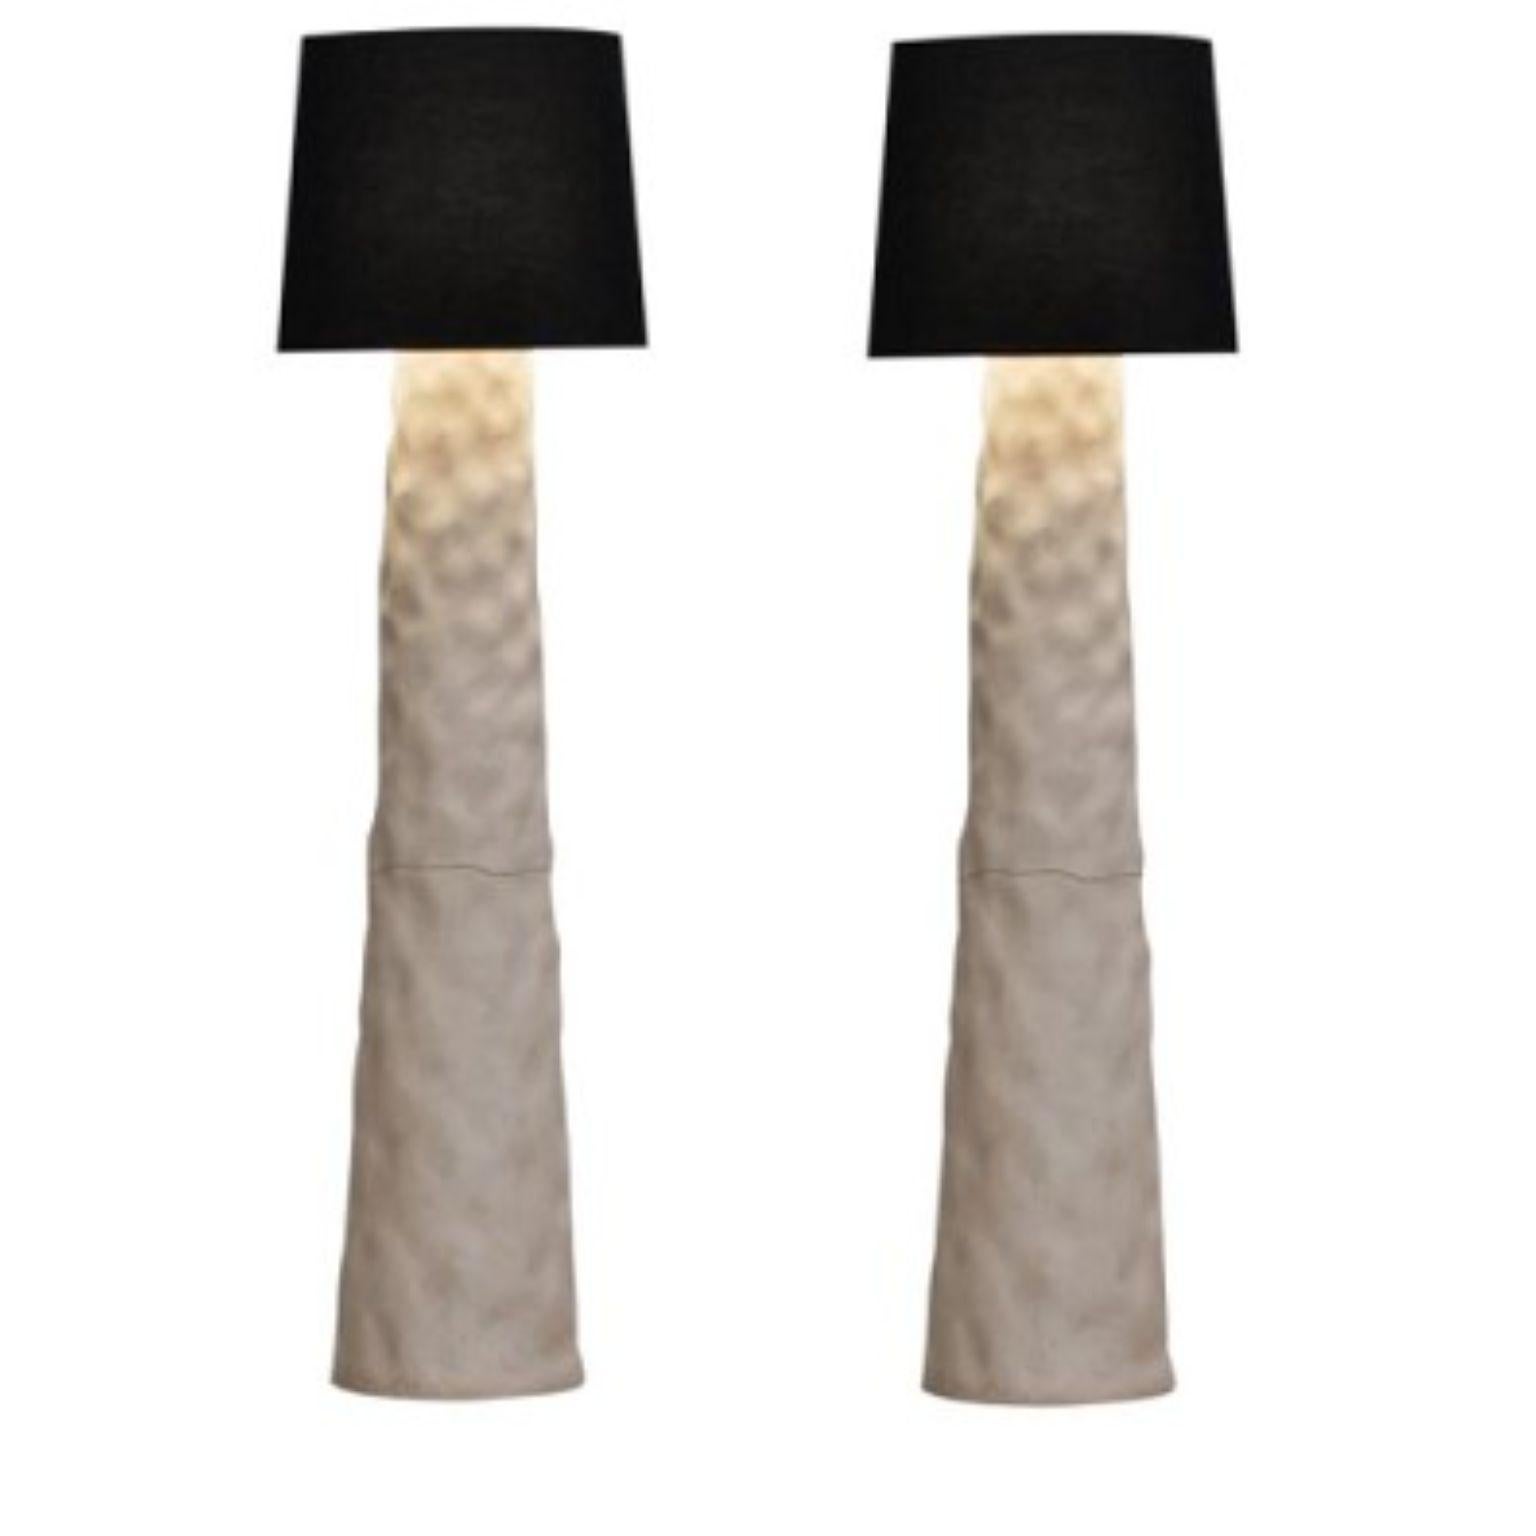 Set of 2 contemporary floor lamps by Faina.
Design: Victoriya Yakusha.
Material: cotton, ceramics.
Dimensions: 50 x 170 cm.
Weight: 50 kg.

*All our lamps can be wired according to each country. If sold to the USA it will be wired for the USA